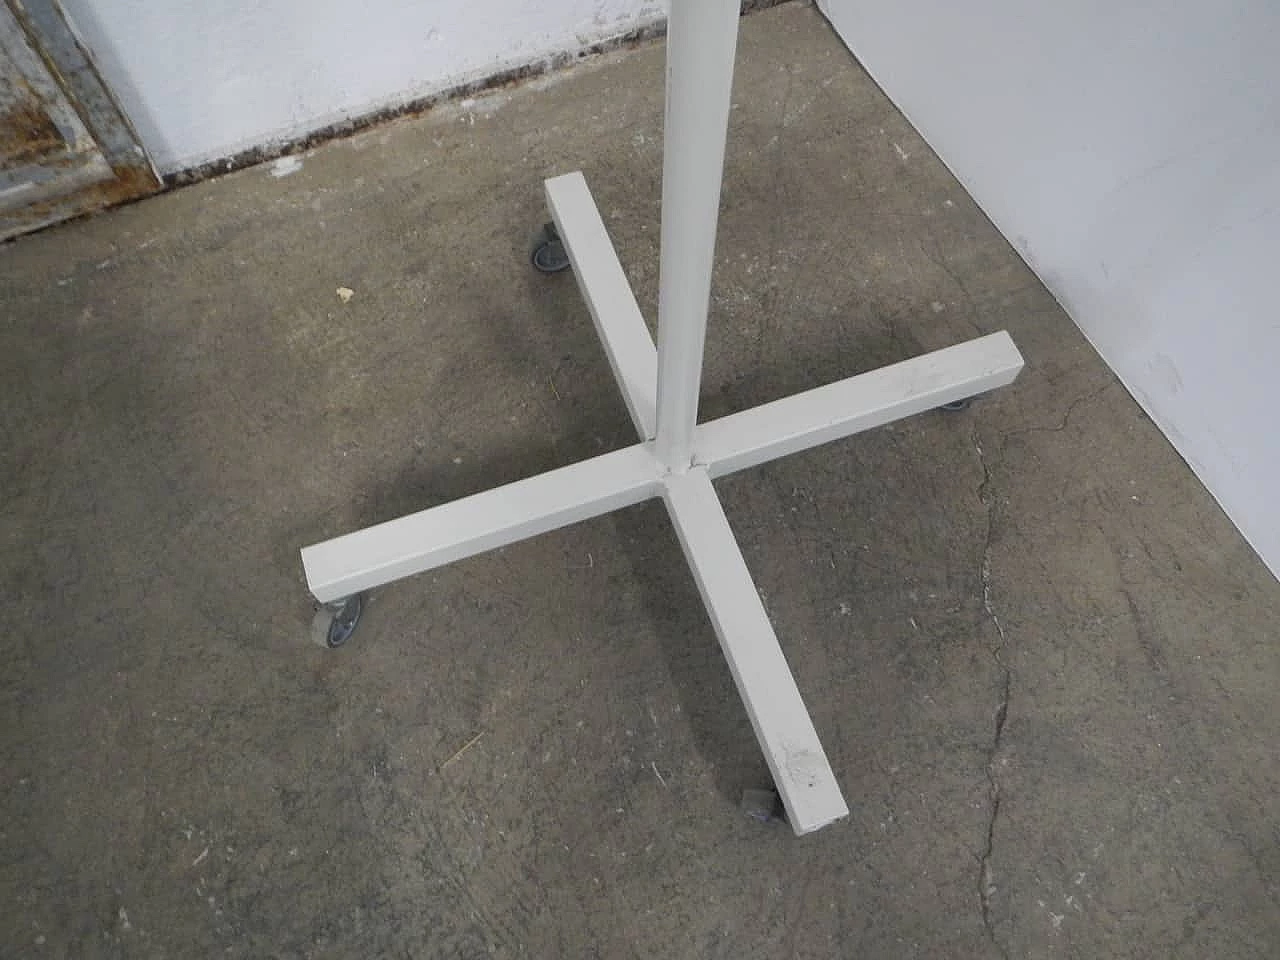 Metal display stand with wheels, 70s 1254833